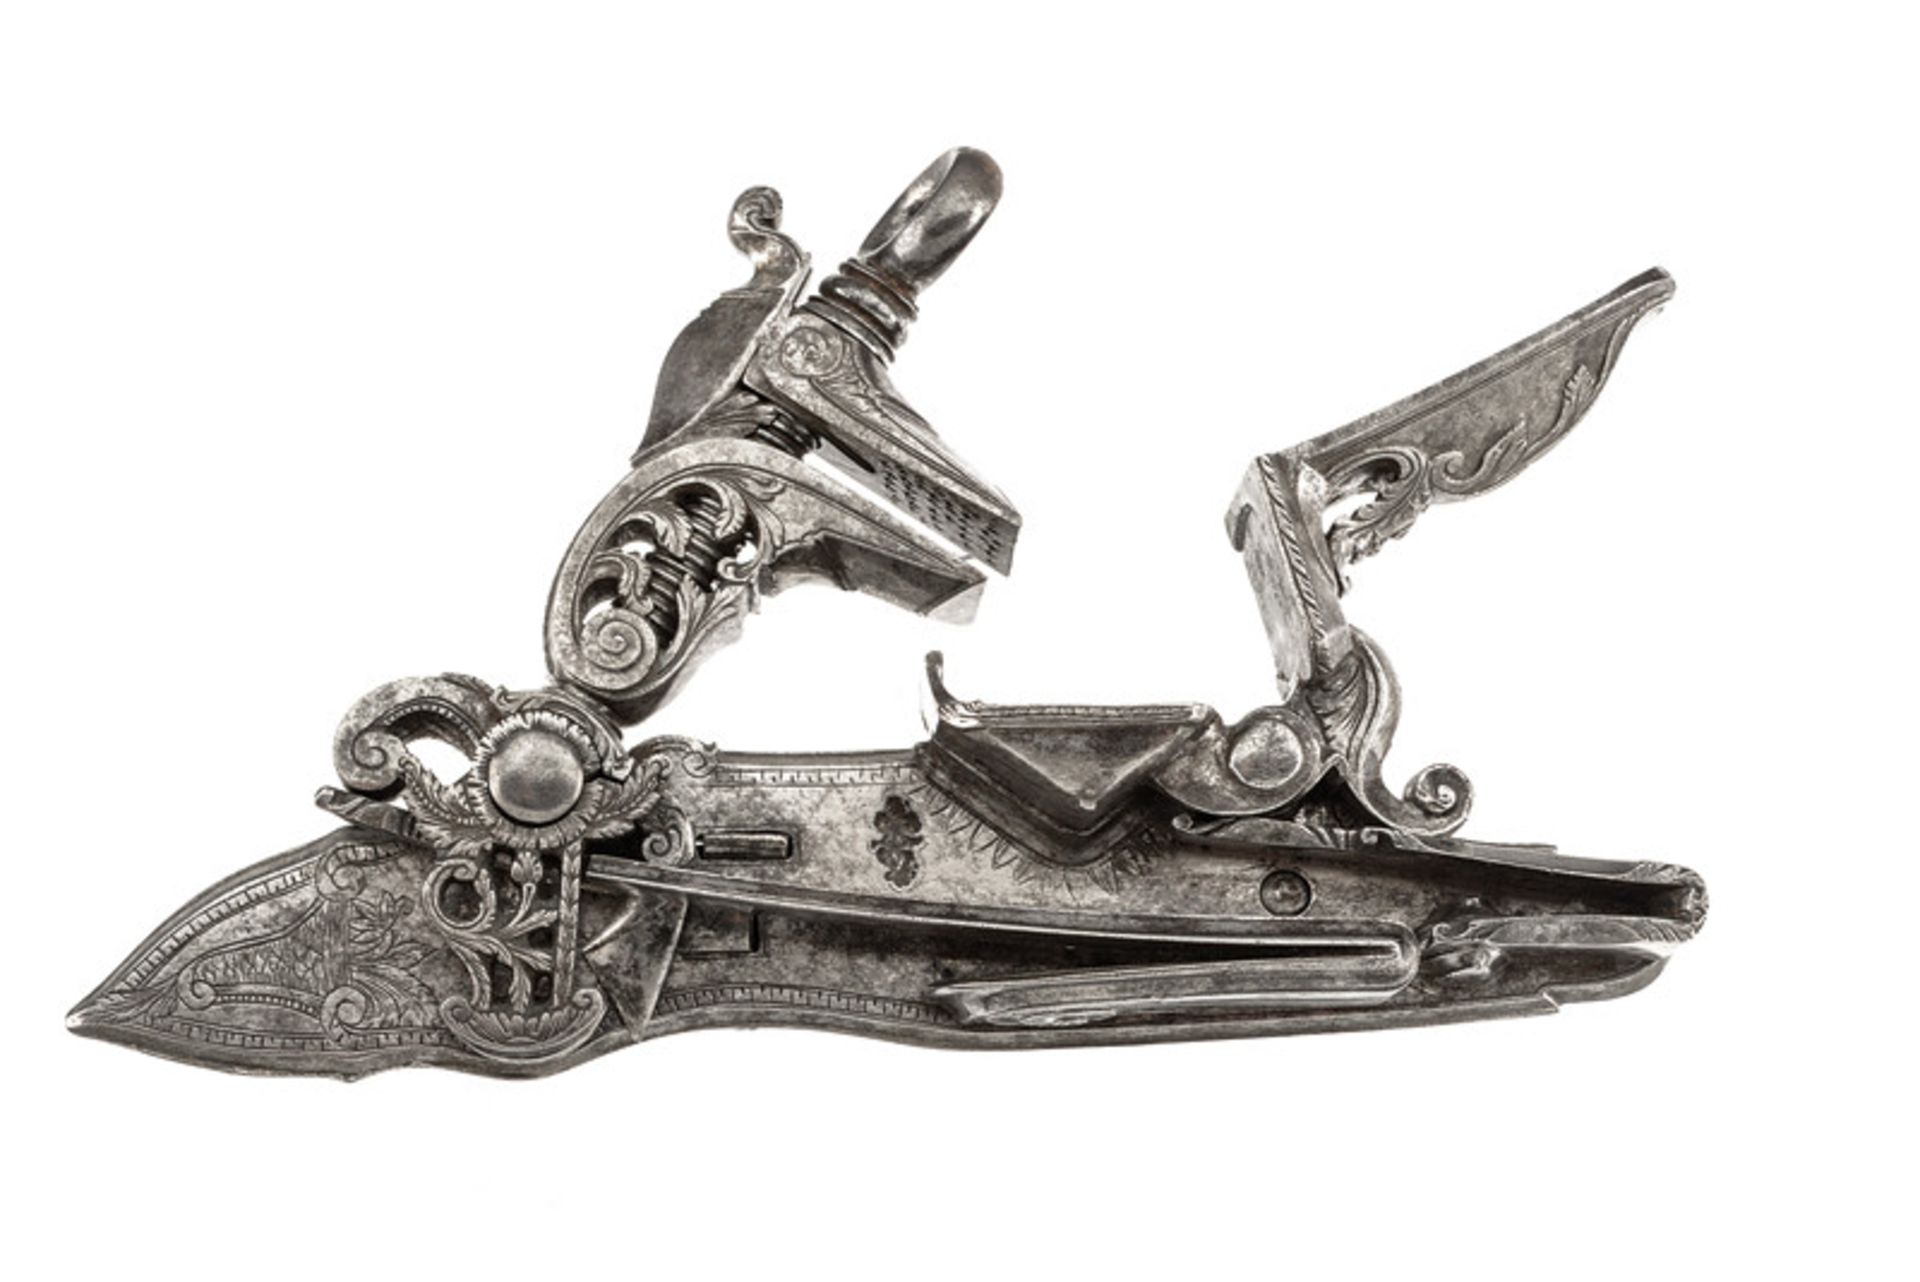 A rare miquelet flintlock dating: third quarter of the 18th Century provenance: Naples Engraved lock